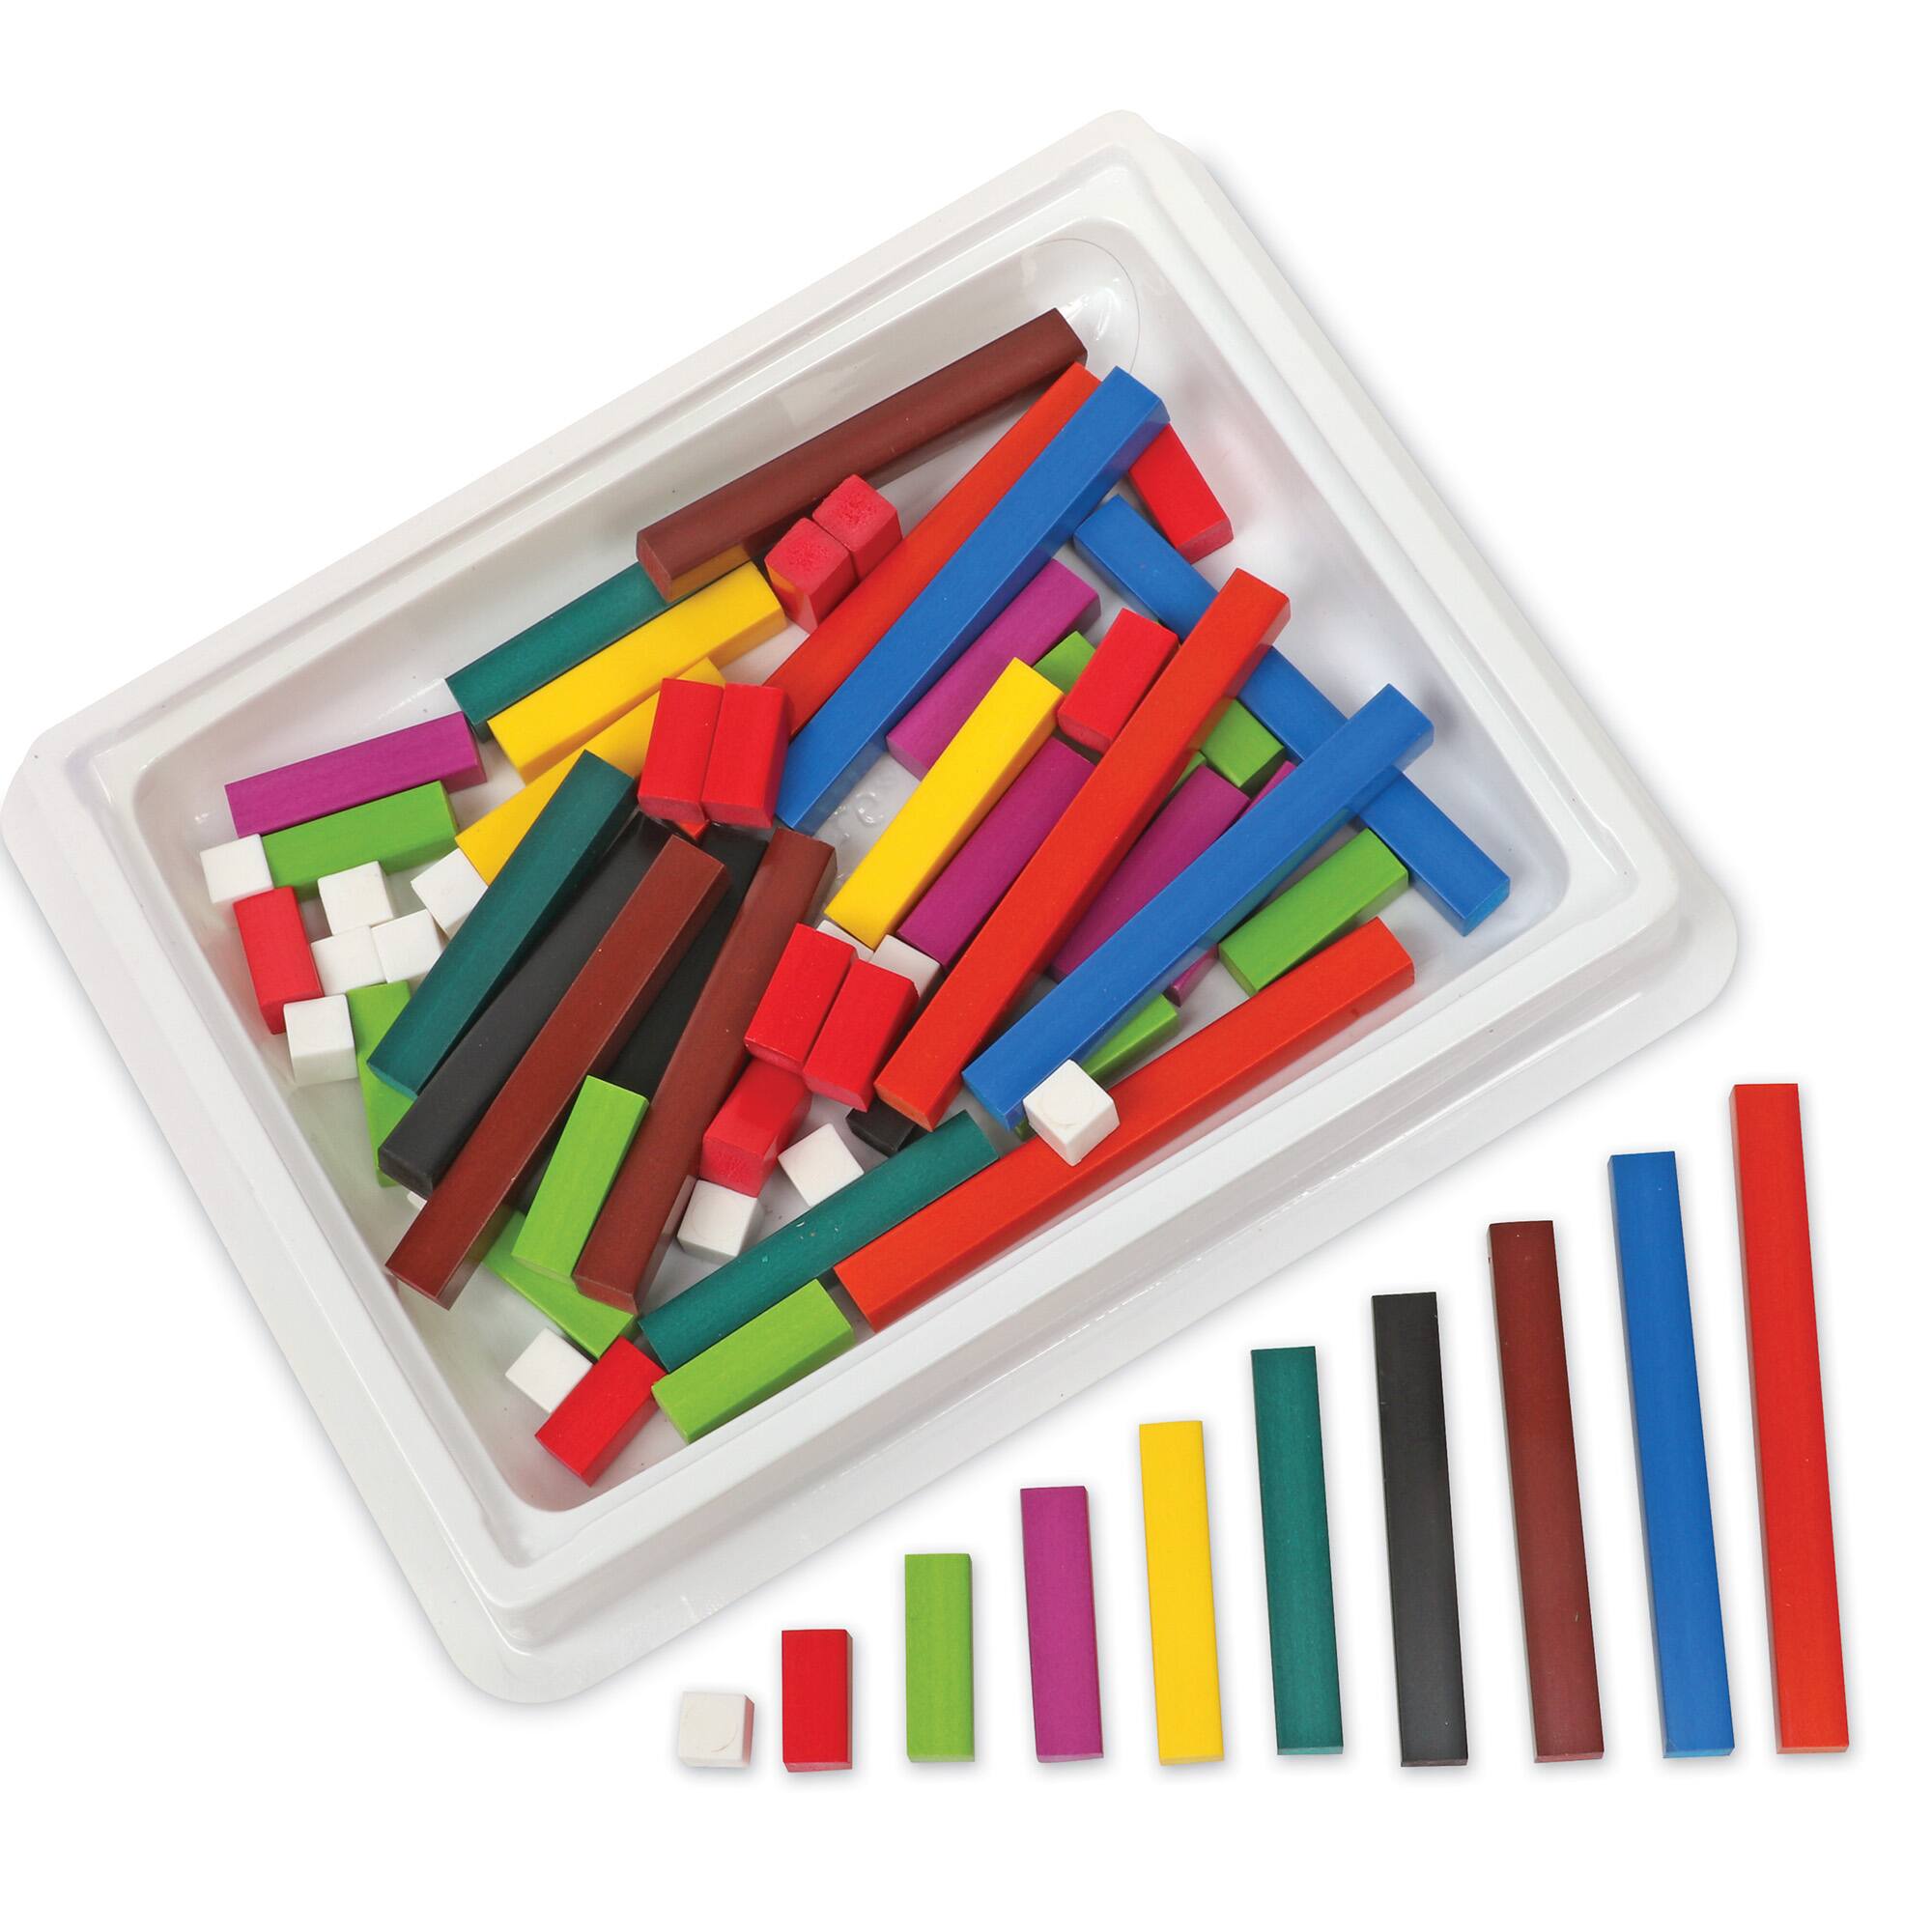 Set of 62 Cuisenaire Rods Mathematical Teaching Aid Learning Resource 